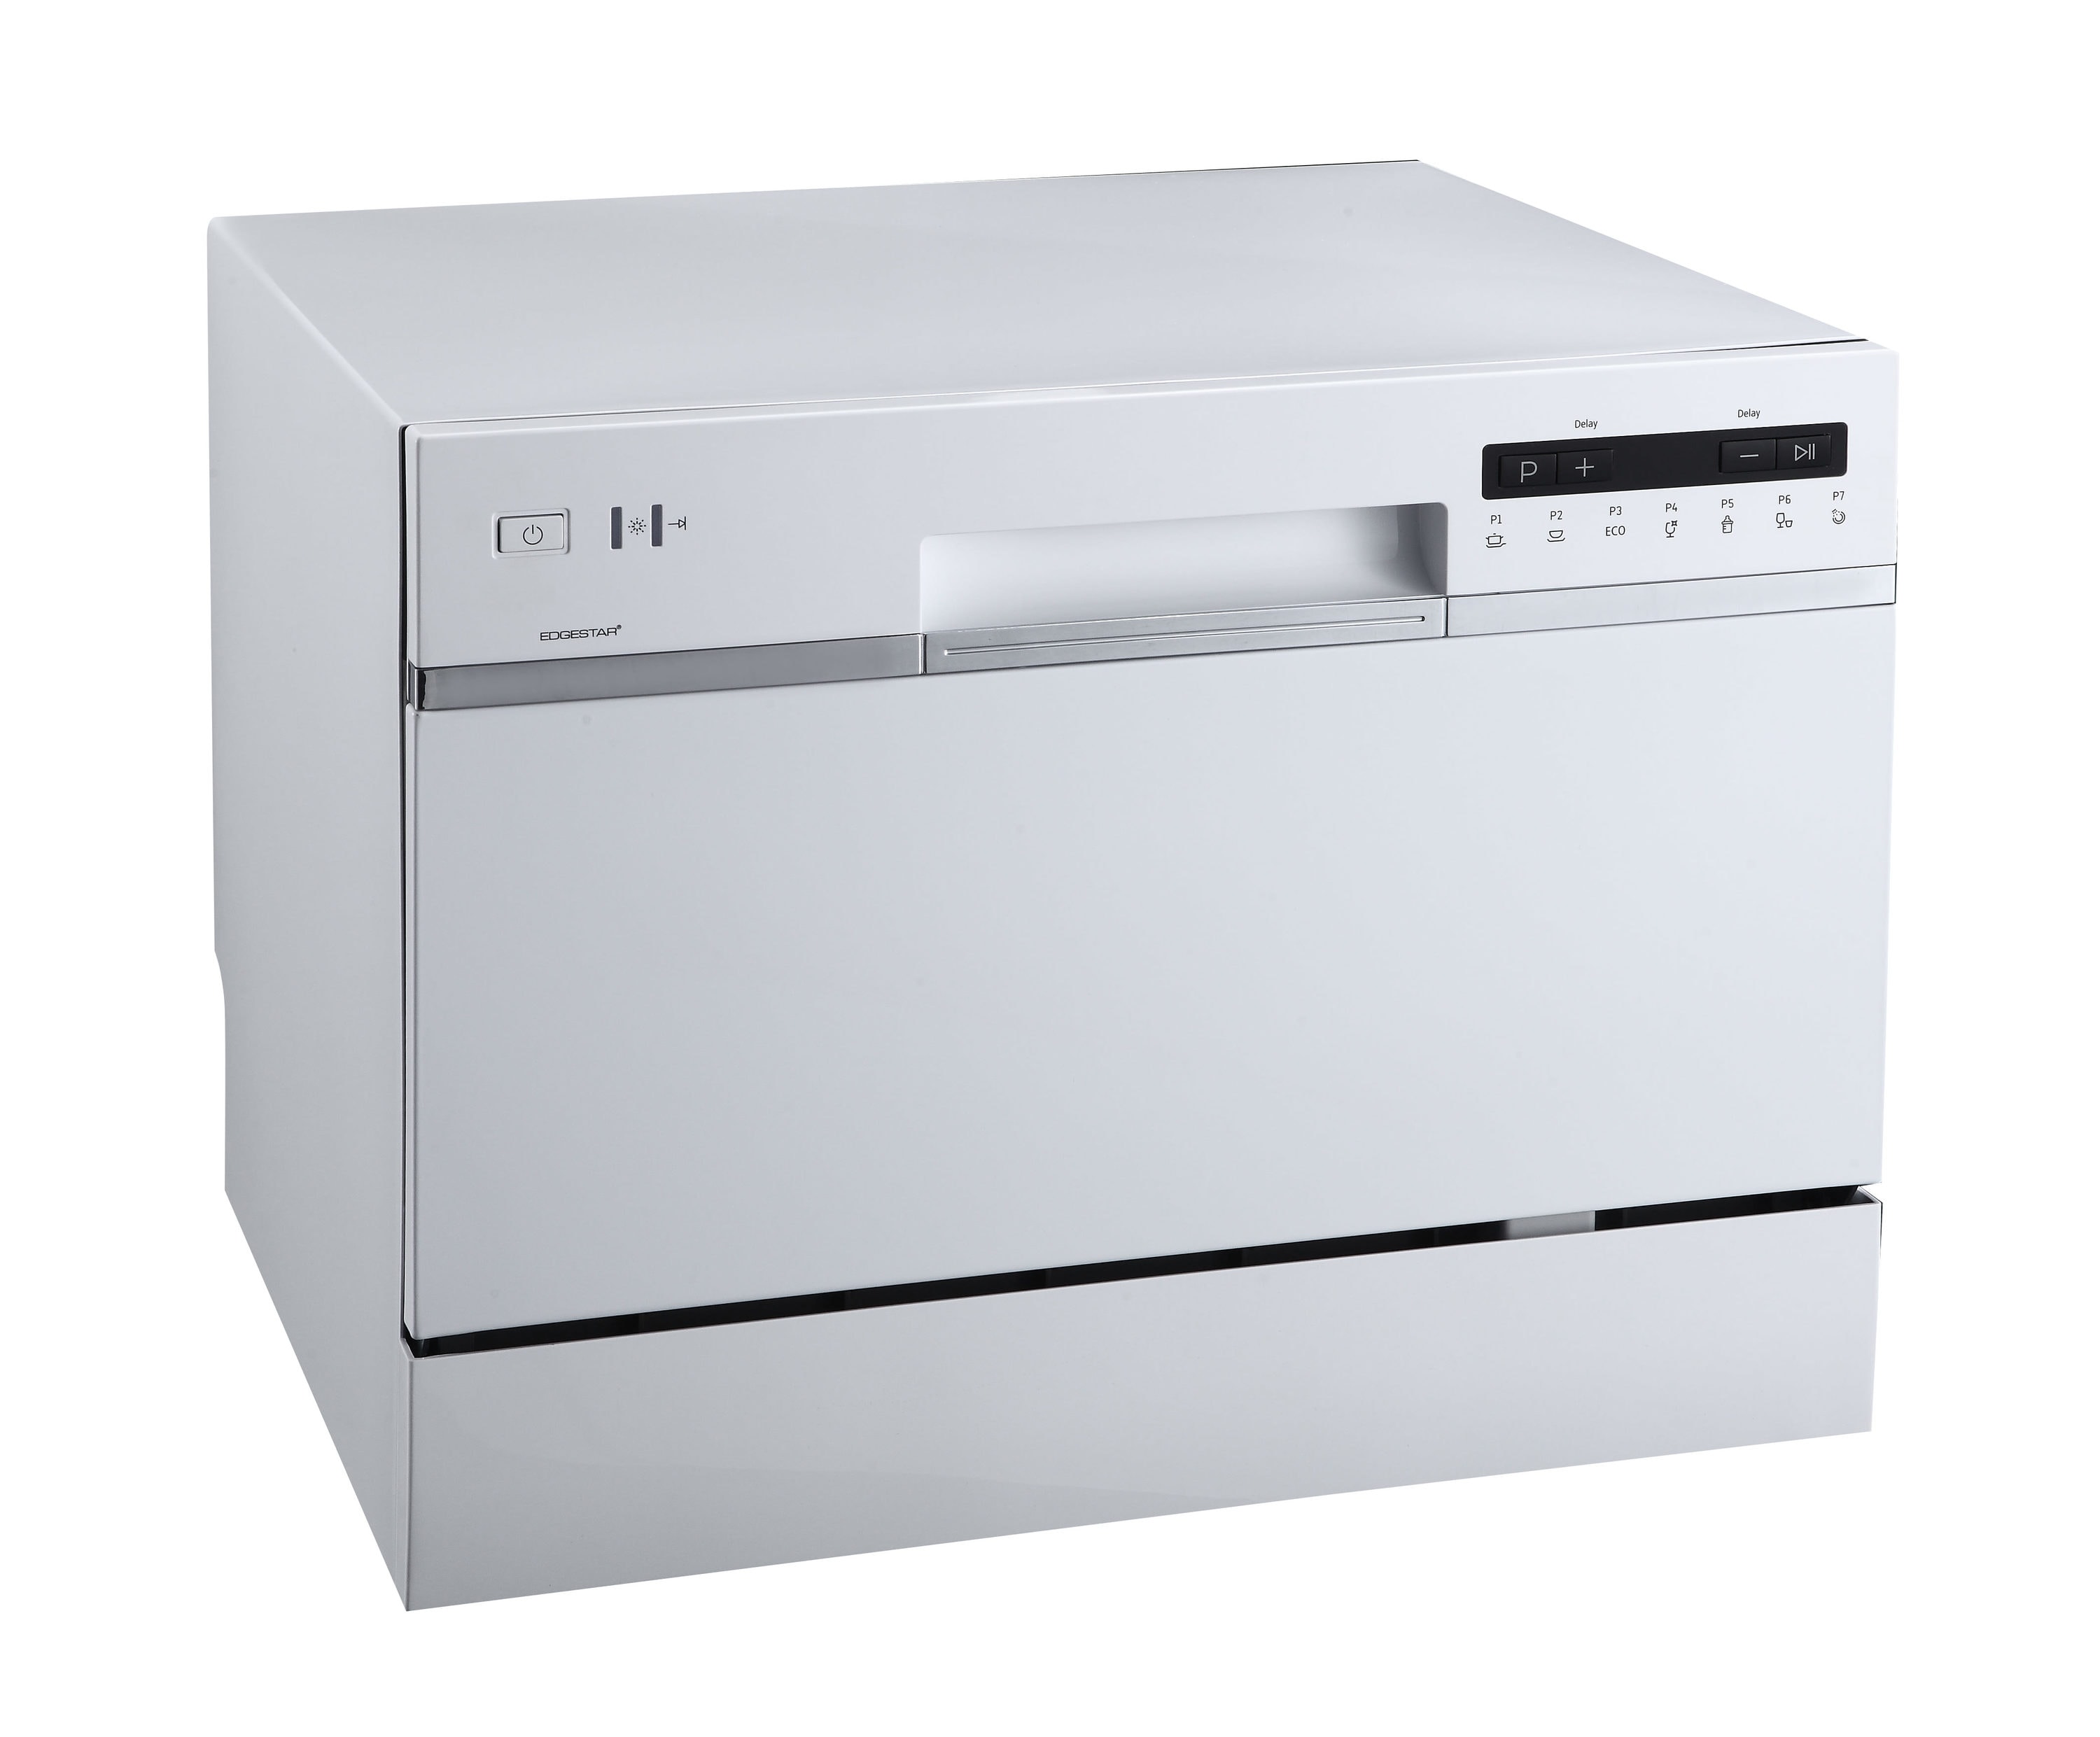 Black+decker compact countertop Dishwasher - appliances - by owner